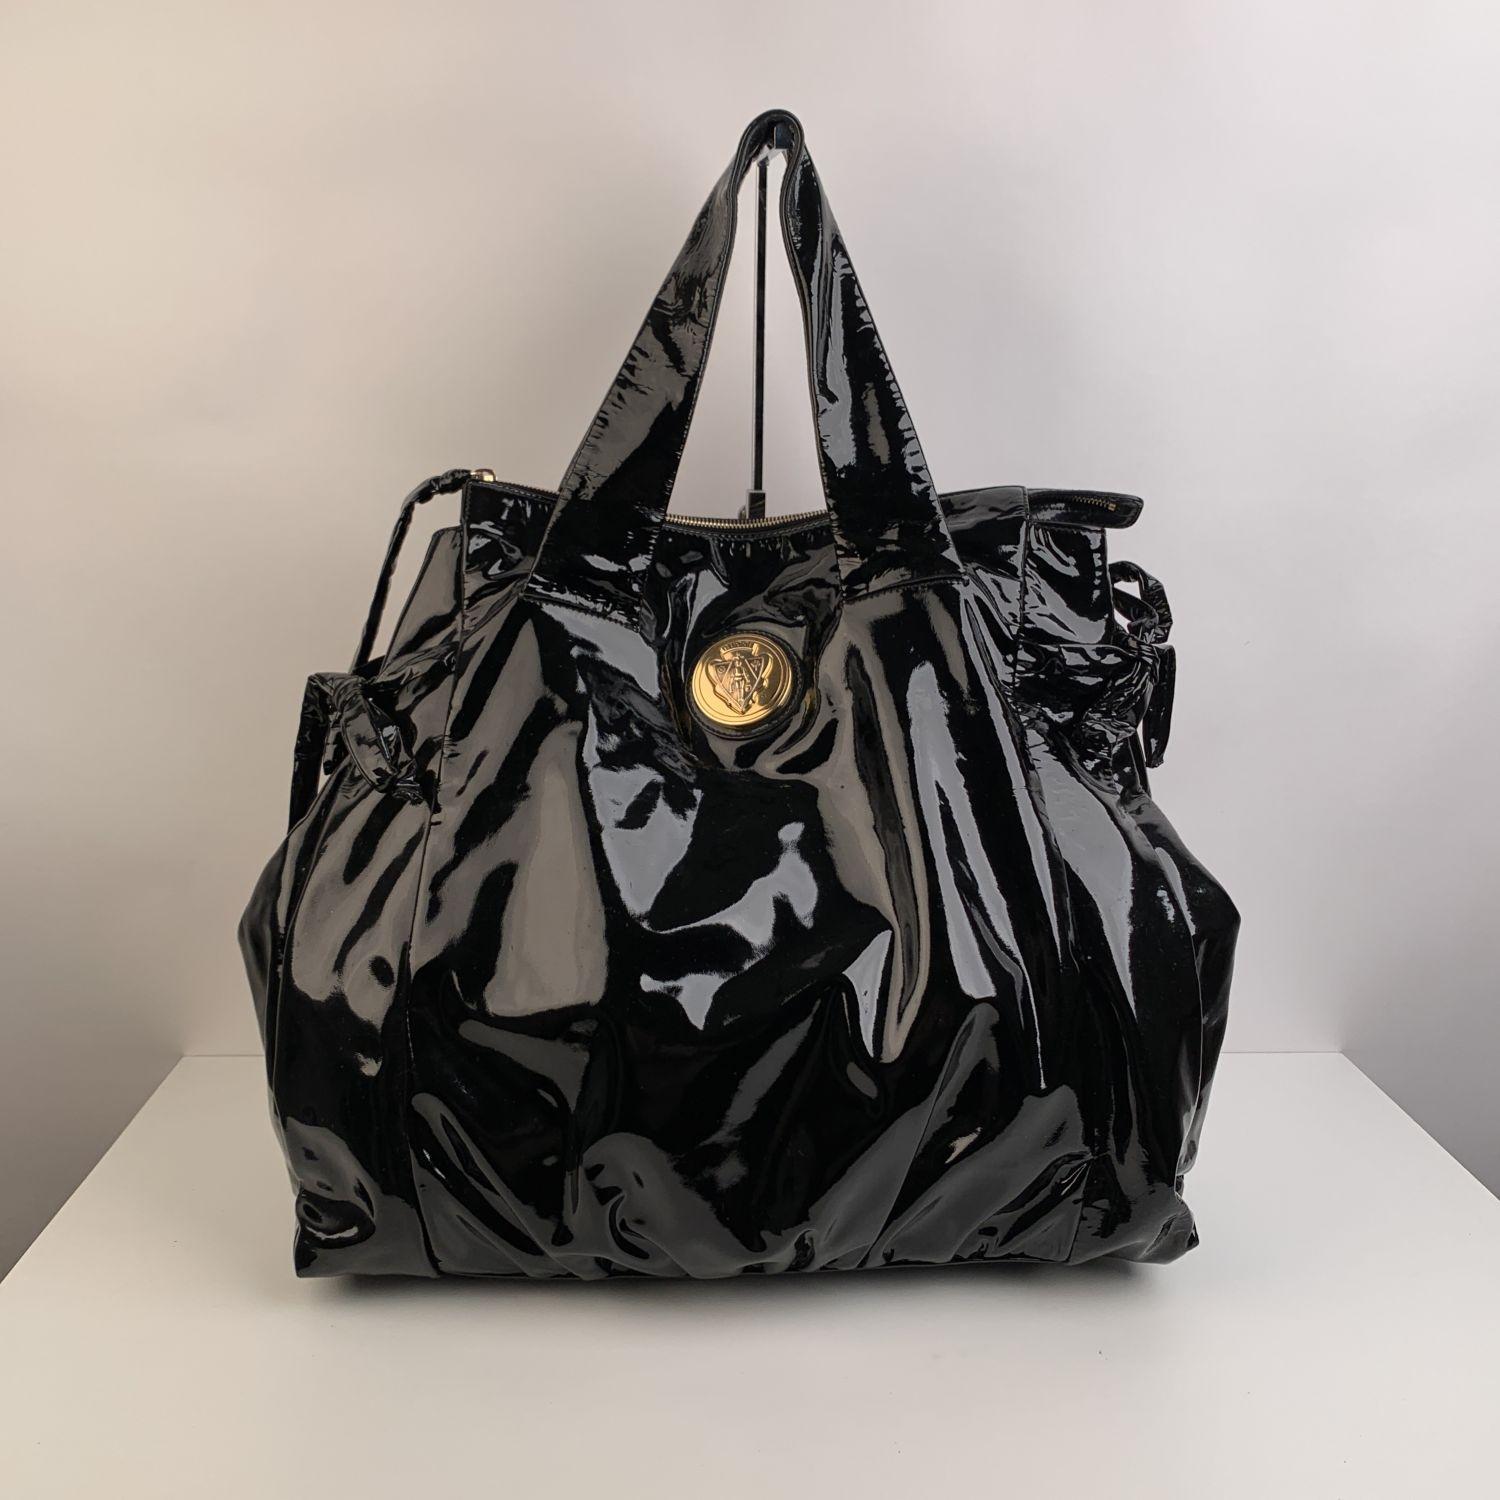 Gucci black patent leather Hysteria tote handbag. GUCCI crest round plaque on the front. Gold-tone hardware. Side self-tie details. Dual flat leather top handles (4